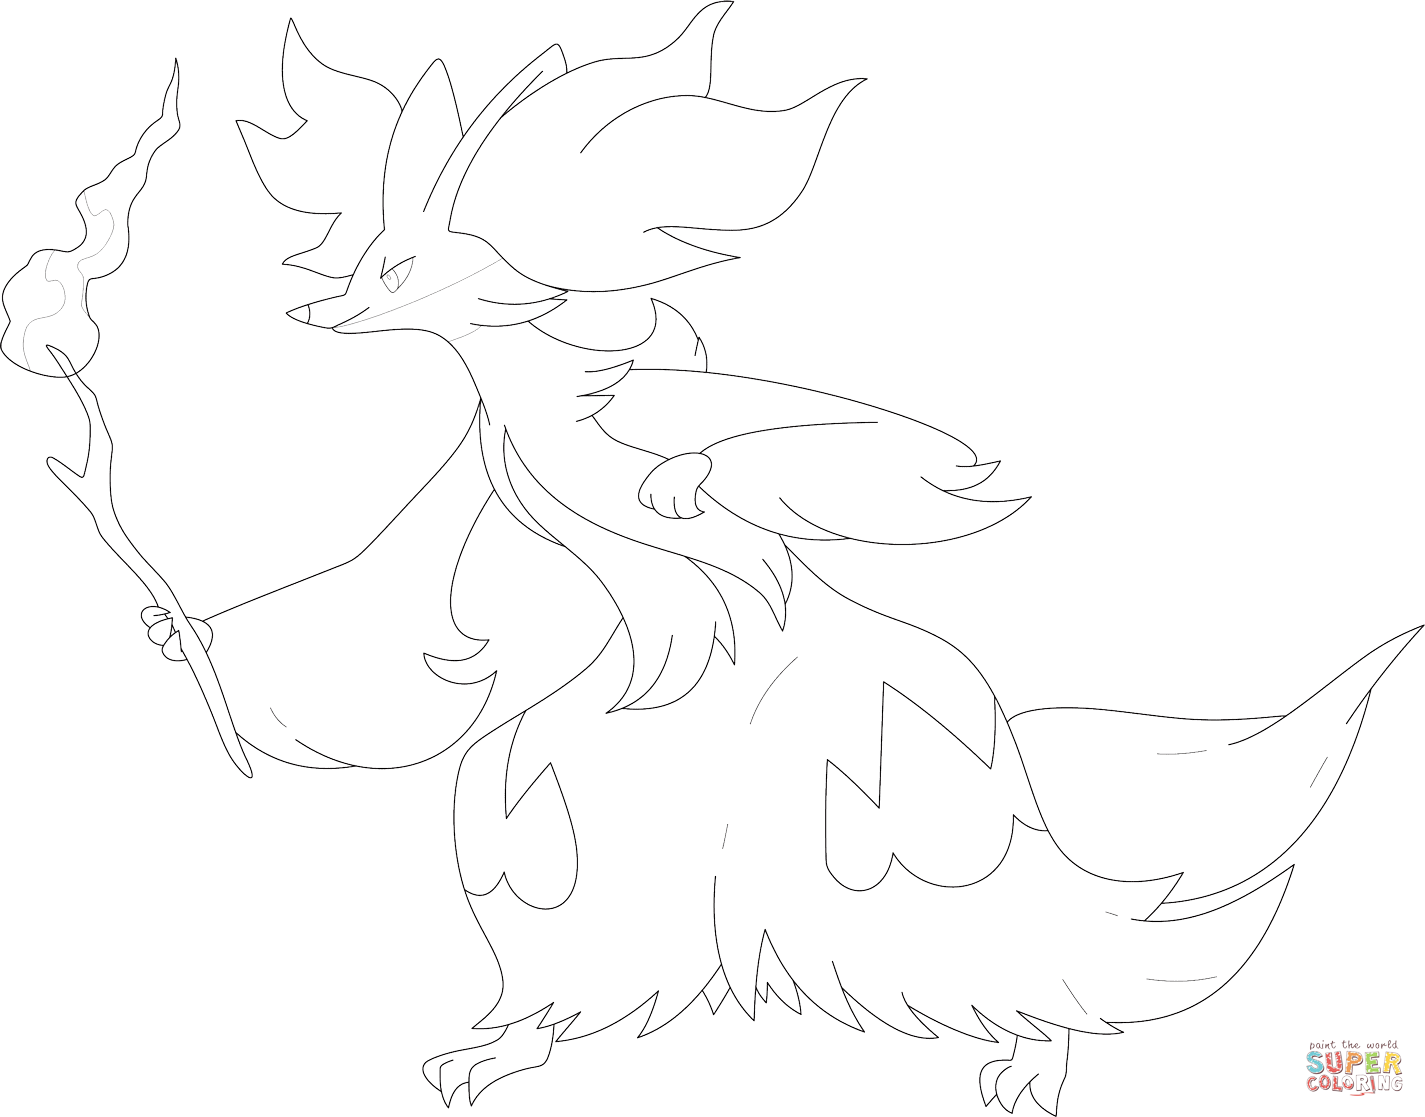 Delphox coloring page | Free Printable Coloring Pages